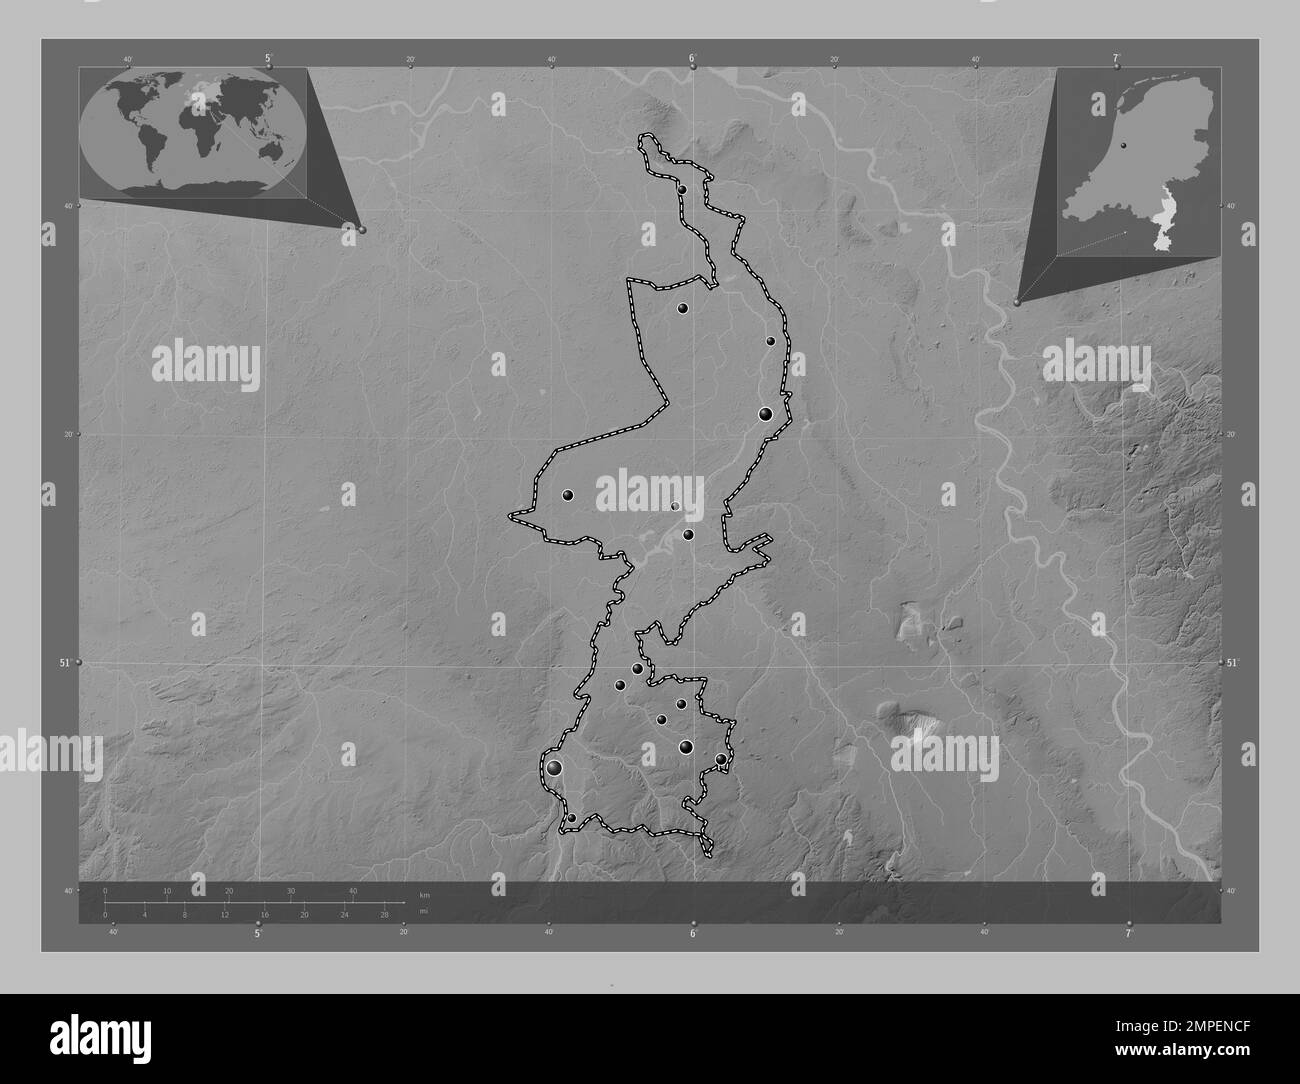 Limburg, province of Netherlands. Grayscale elevation map with lakes and rivers. Locations of major cities of the region. Corner auxiliary location ma Stock Photo